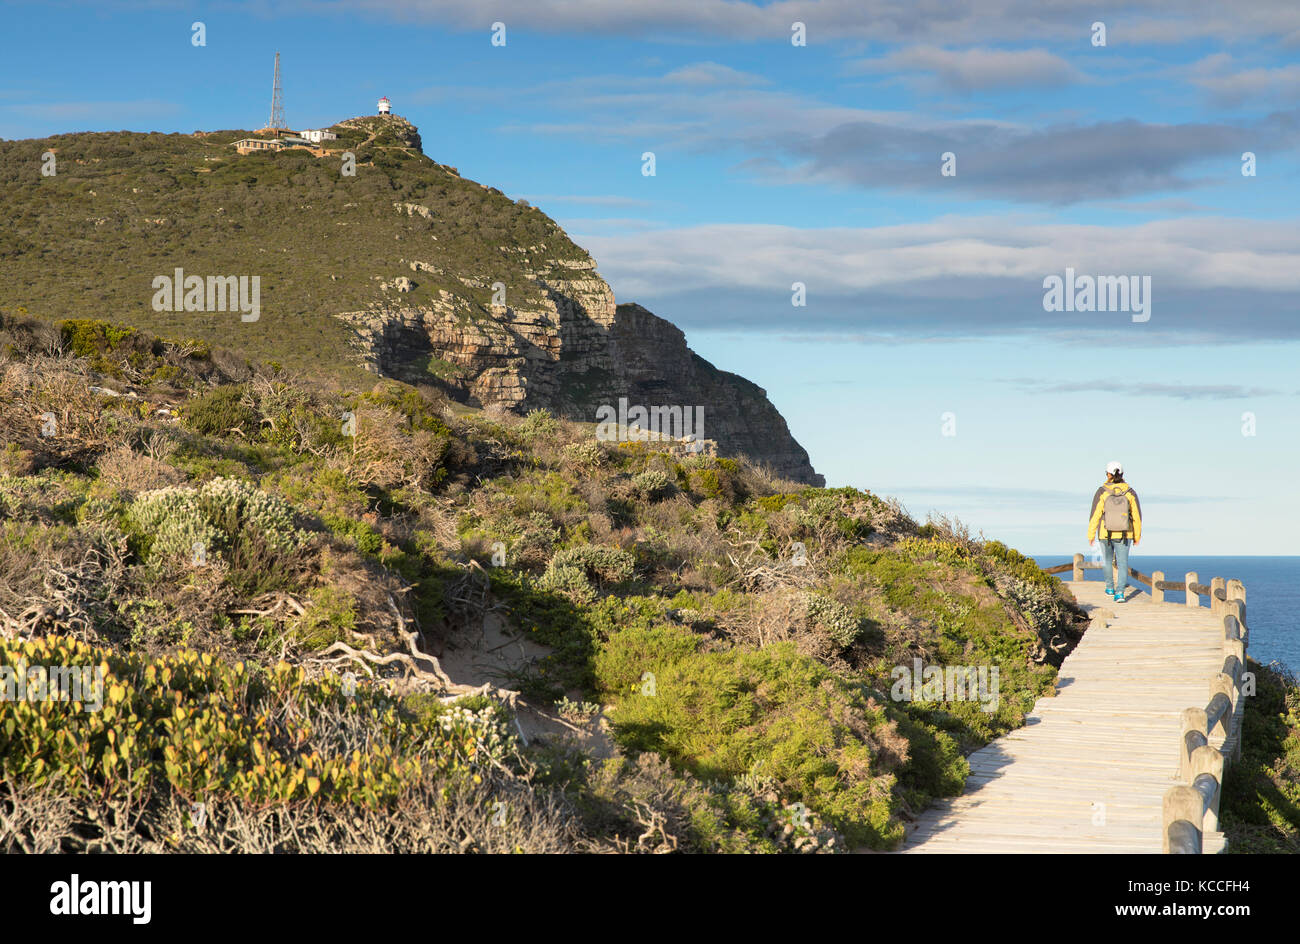 Woman hiking at Cape of Good Hope, Cape Point National Park, Cape Town, Western Cape, South Africa (MR) Stock Photo